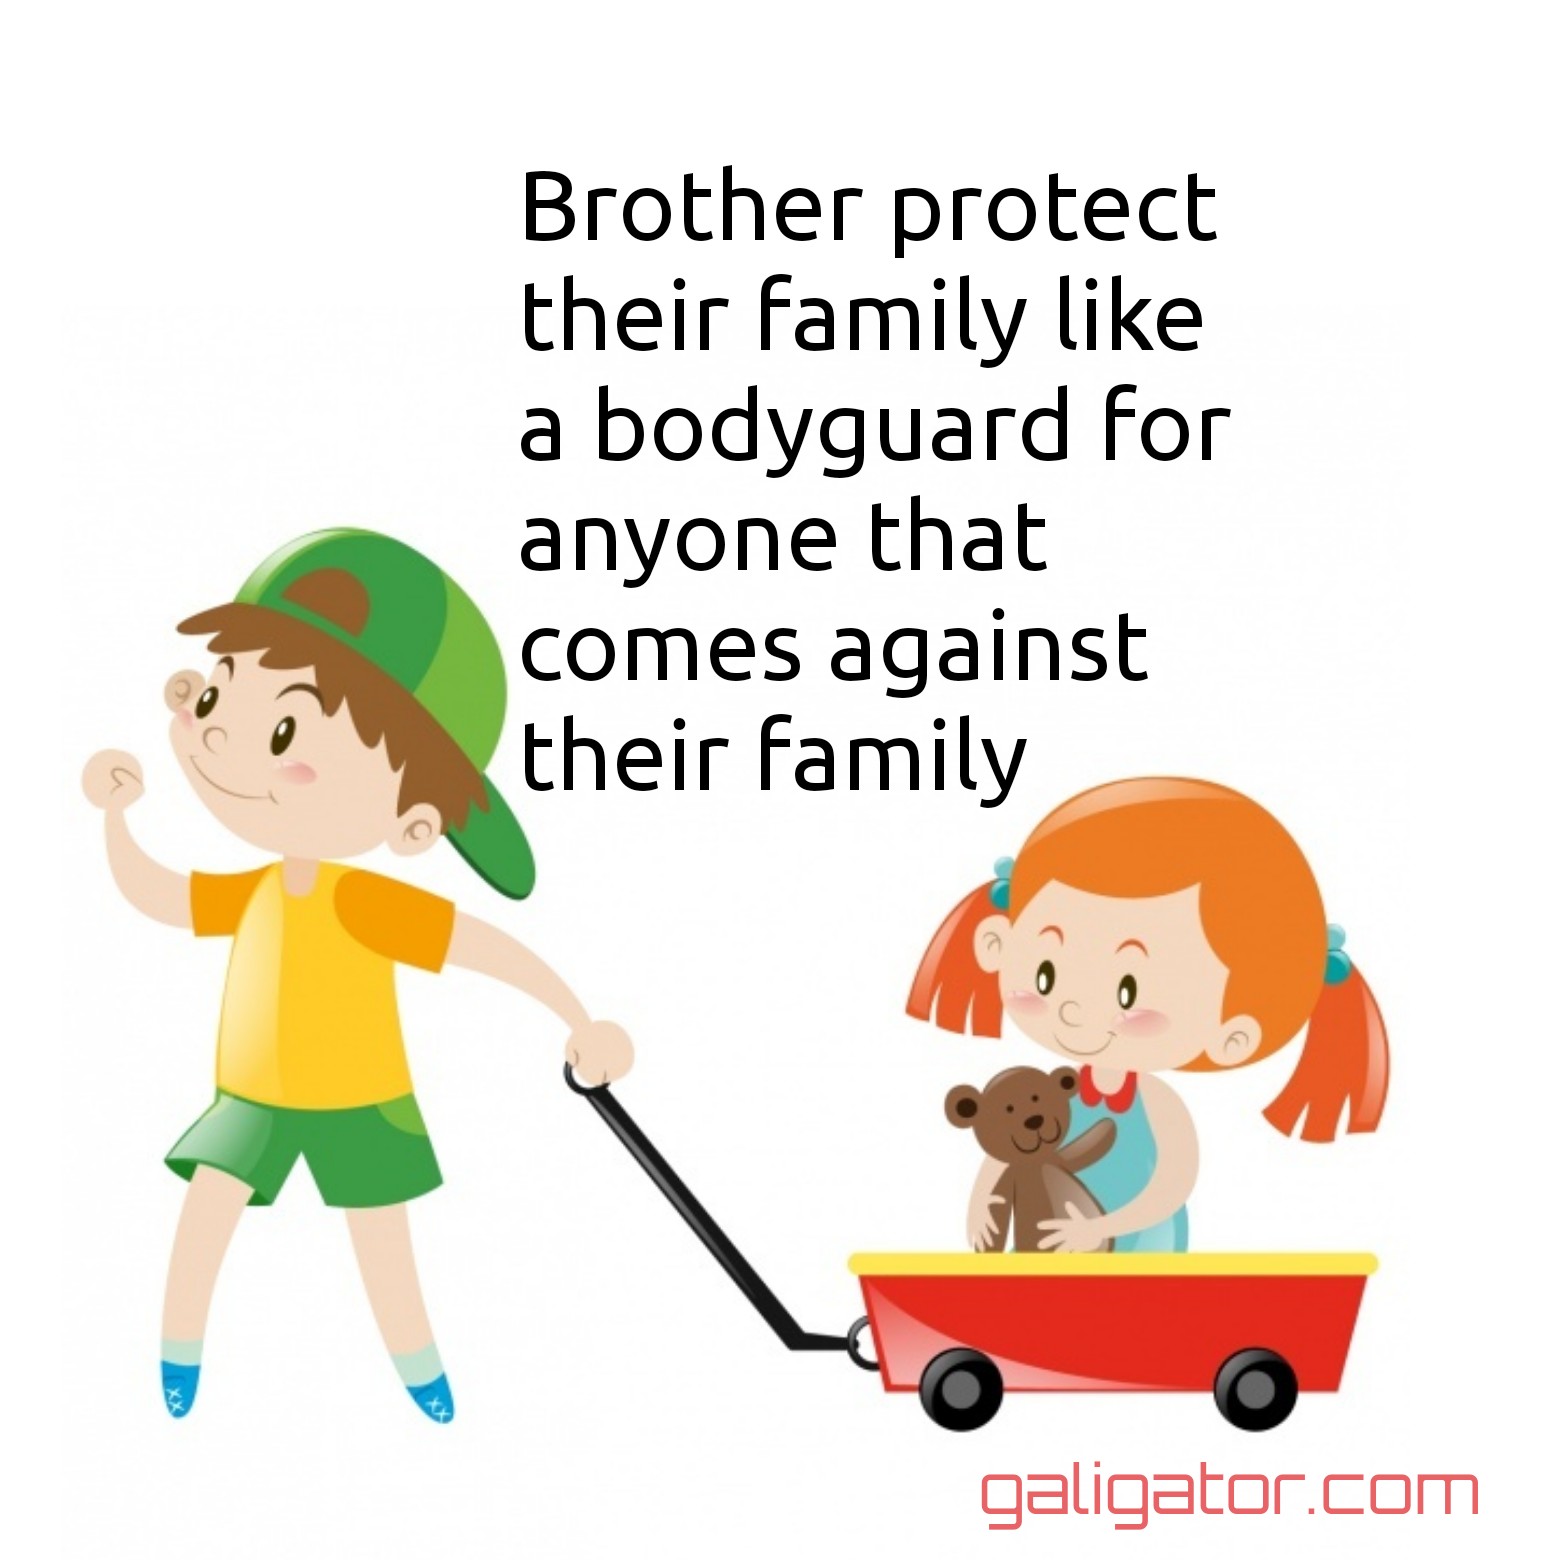  brother sister funny quotes , heart touching emotional brother and sister quotes , quotes about brother and sister relationship , brother sister love quotes, brother sister quotes, brother sister funny quotes , heart touching emotional brother and sister quotes  quotes about brother and sister relationship  ,brother sister love quotes, bonding of brother and sister